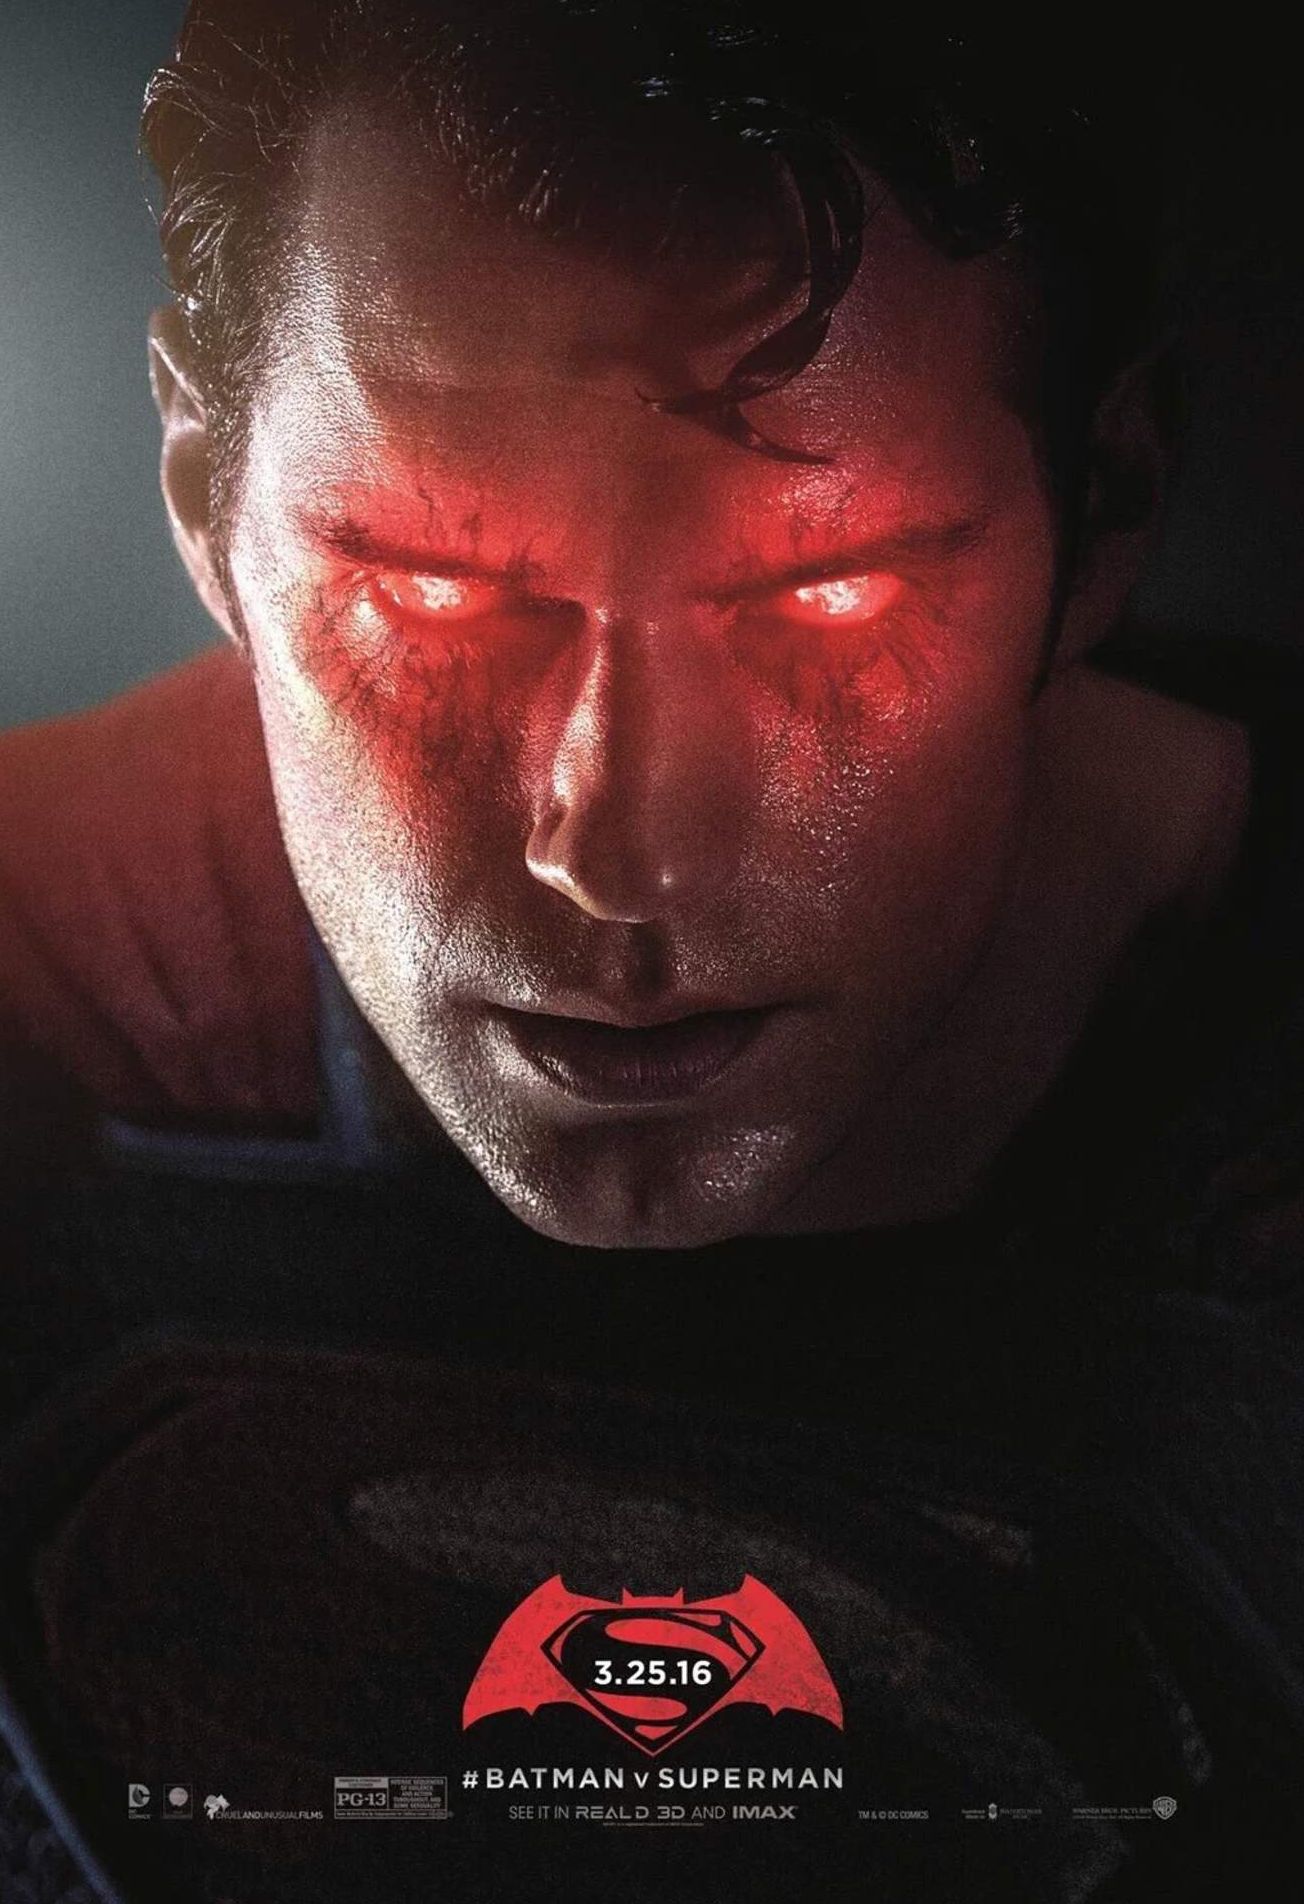 Unused Superman poster makes the big boy scout look frighten